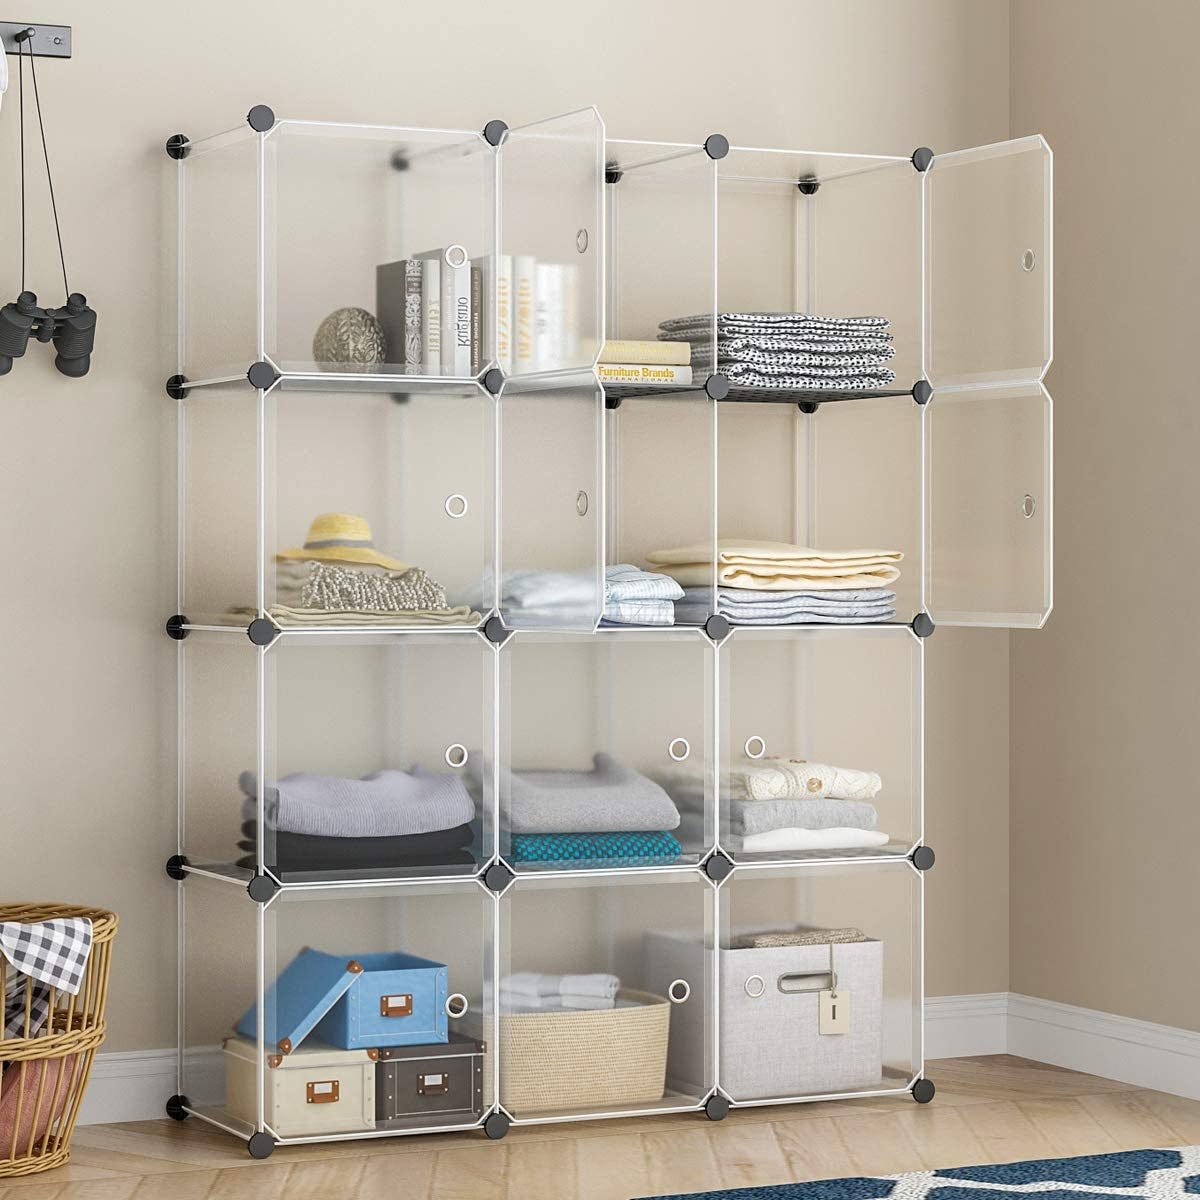 Clothes Storage Ideas 18 Storage Ideas for Small Spaces ...